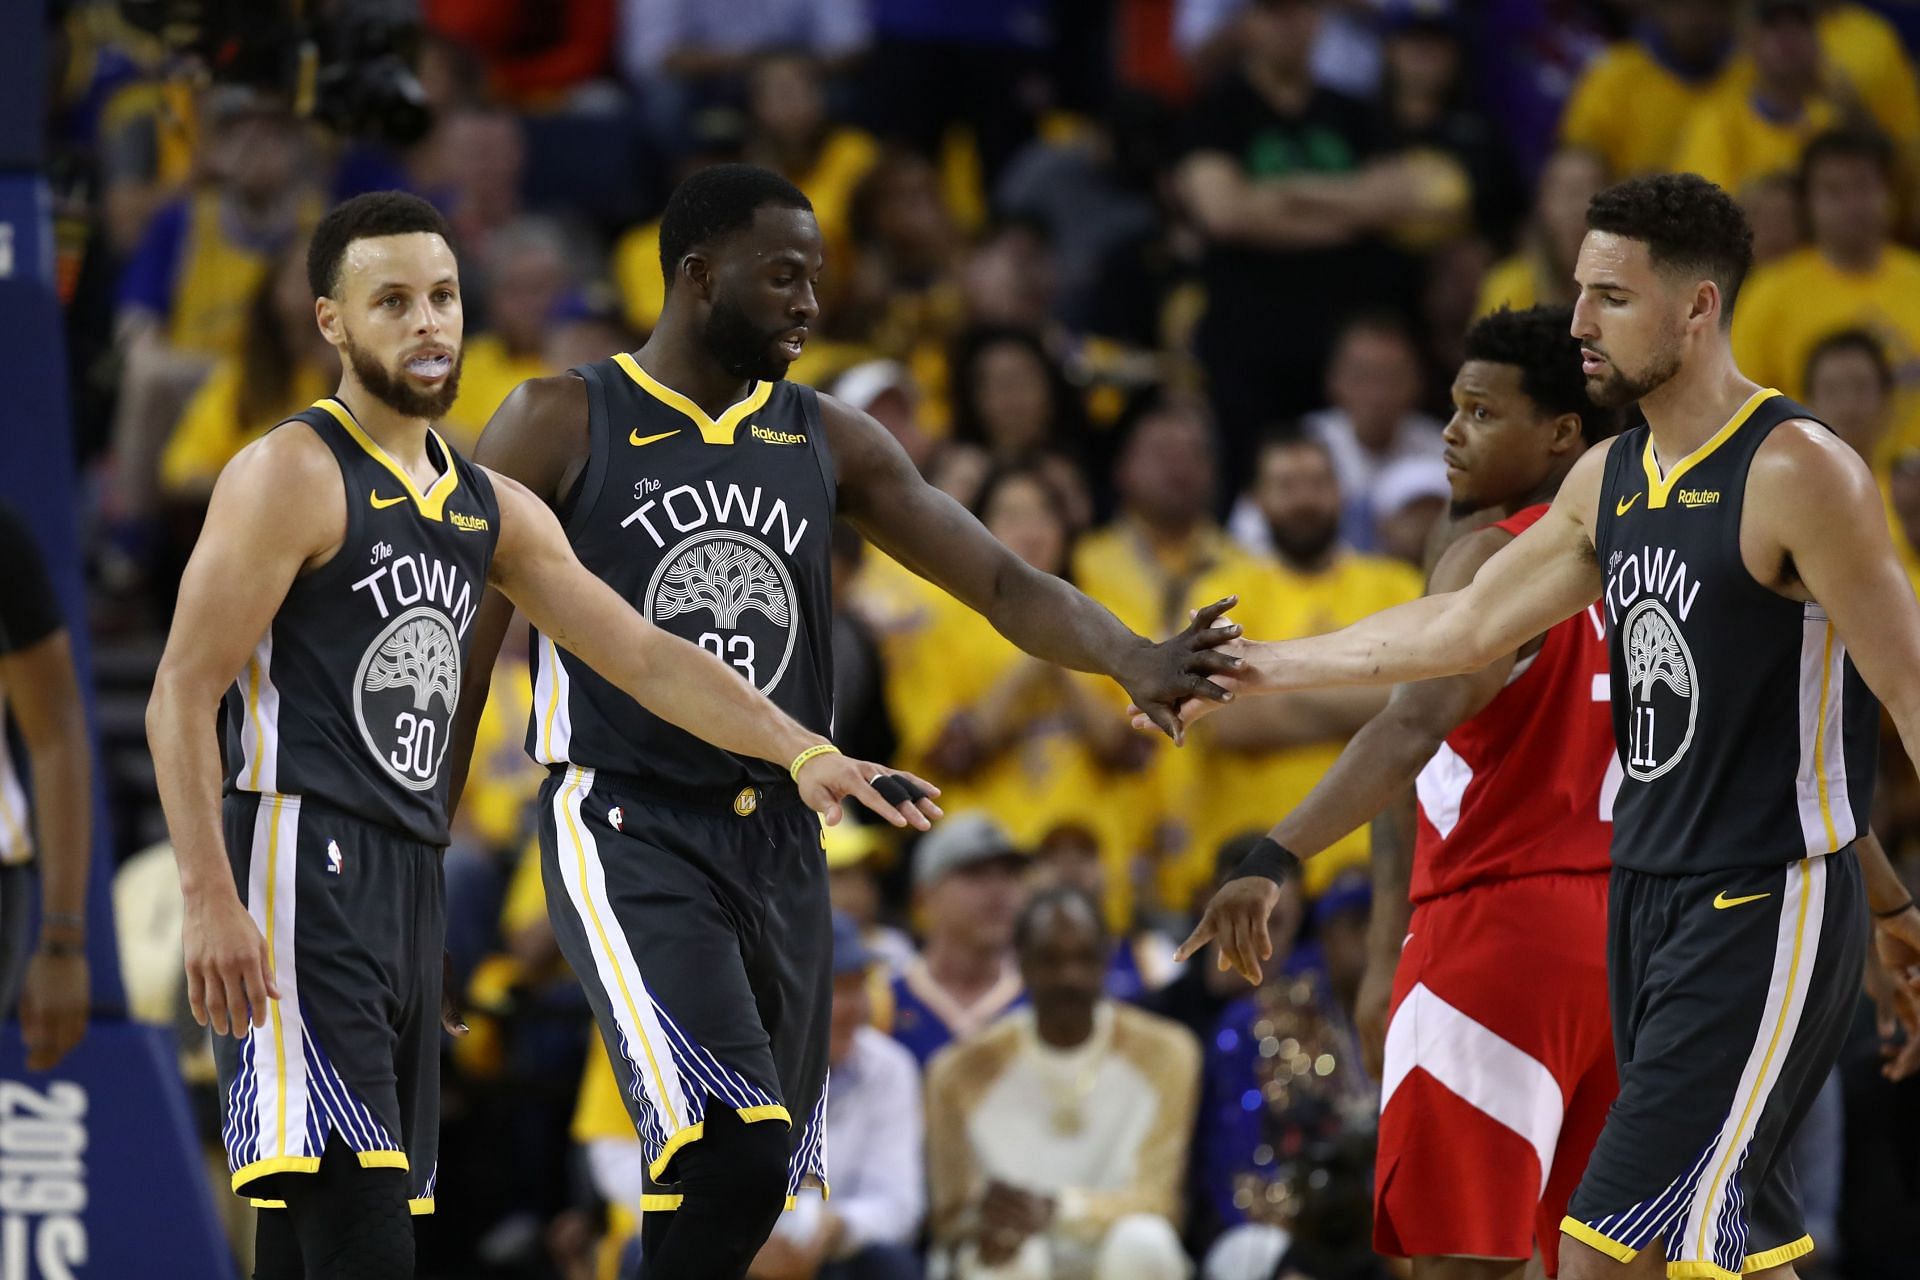 Stephen Curry #30, Draymond Green #23 and Klay Thompson #11 of the Golden State Warriors react against the Toronto Raptors in the second half during Game Four of the 2019 NBA Finals at ORACLE Arena on June 07, 2019 in Oakland, California.